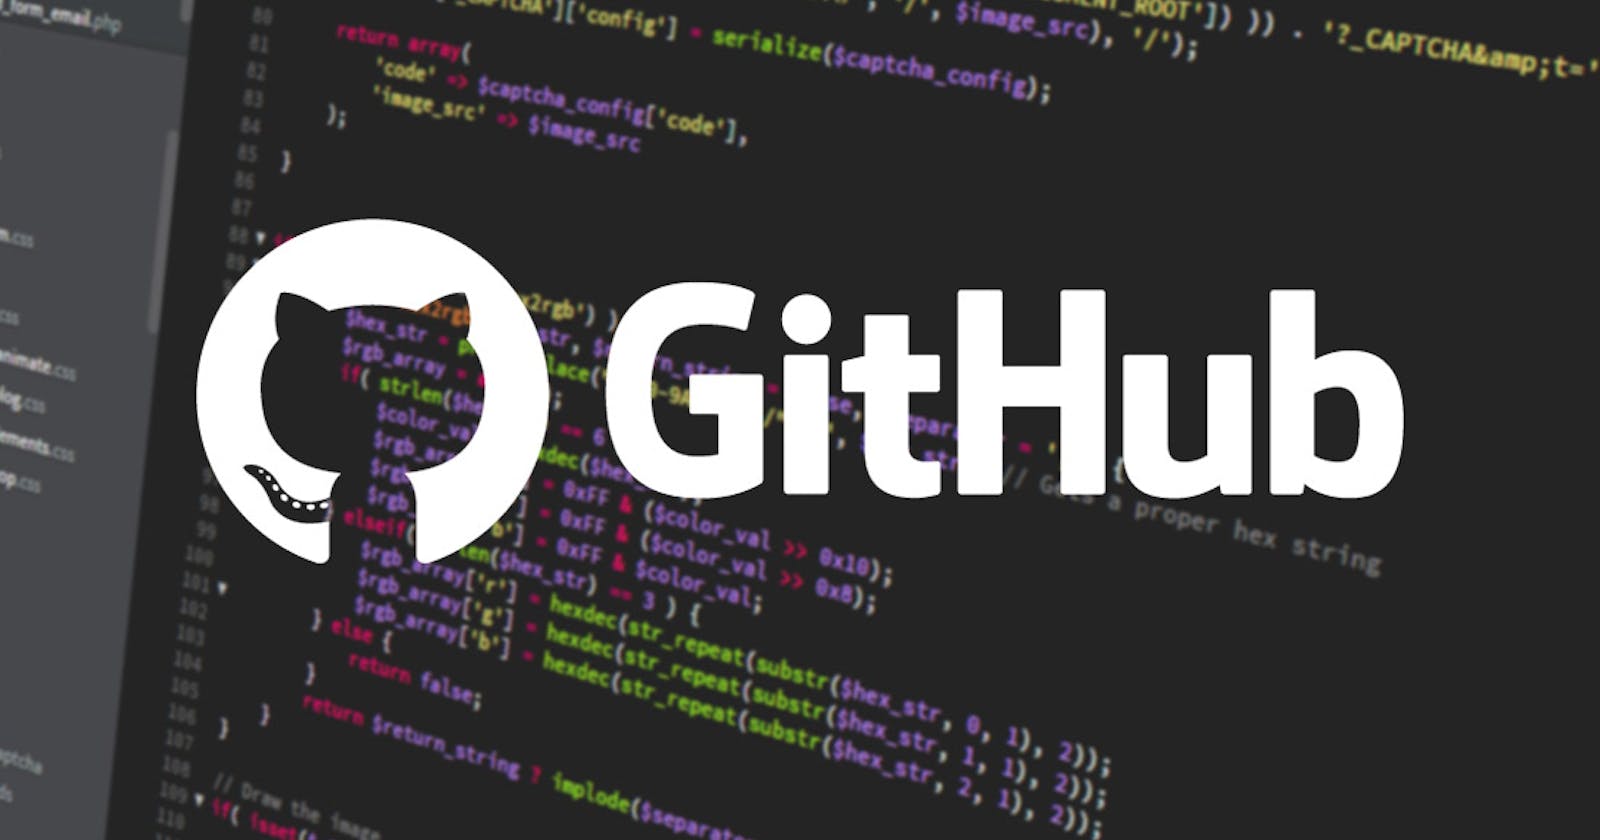 How to deploy from an organization's Github account to a remote server